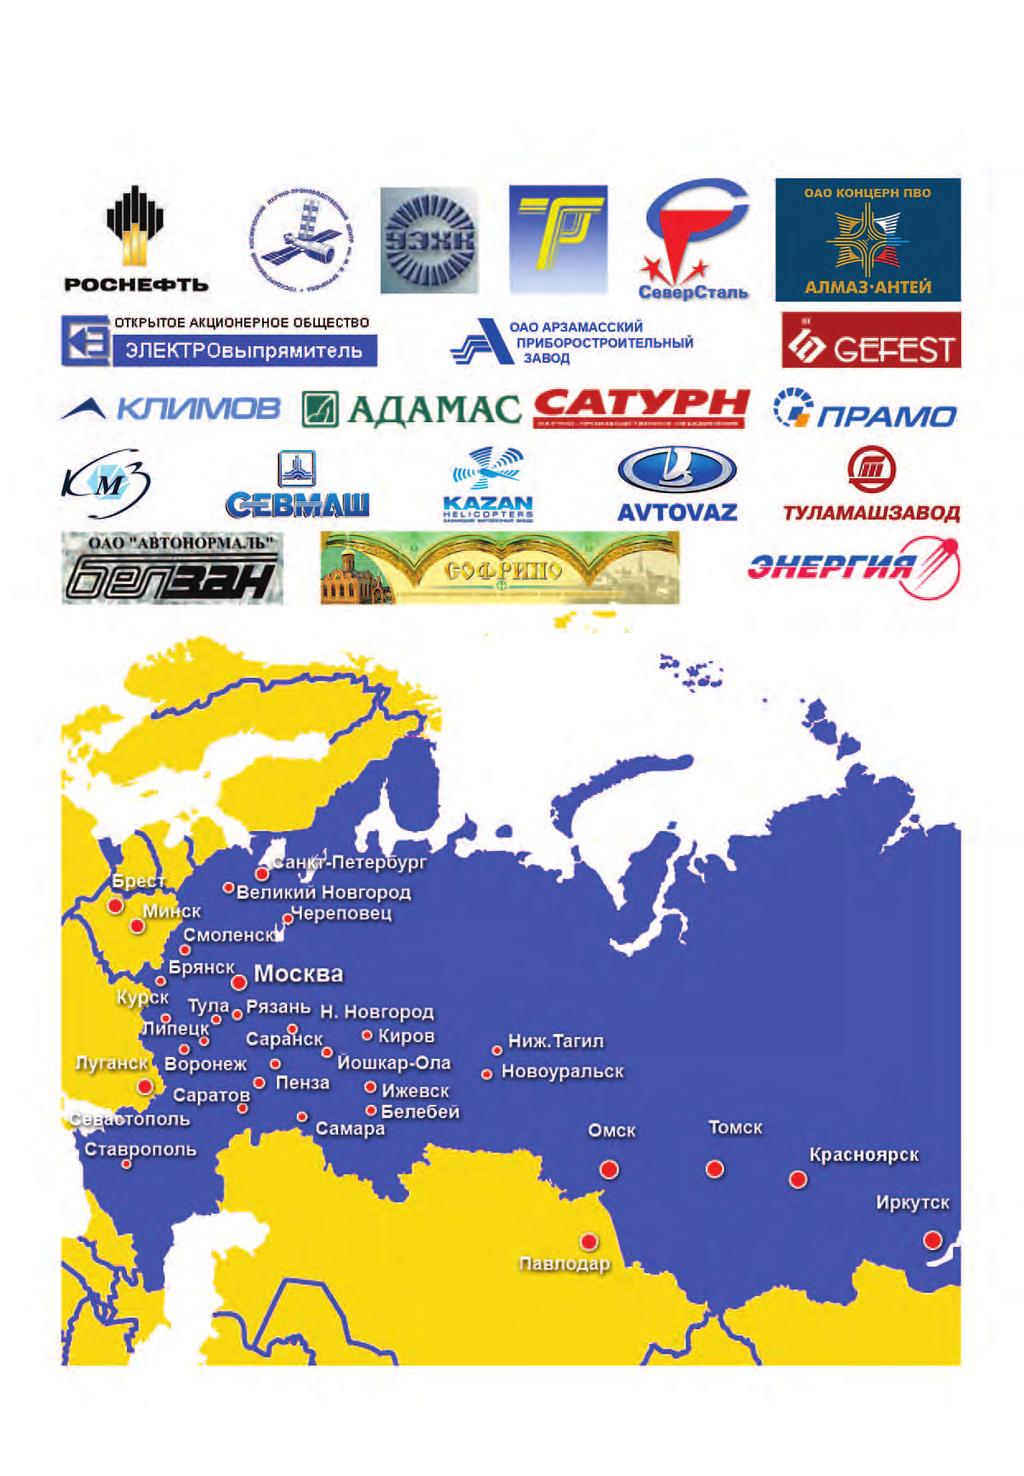 More than 200 industrial enterprises are our customers in different